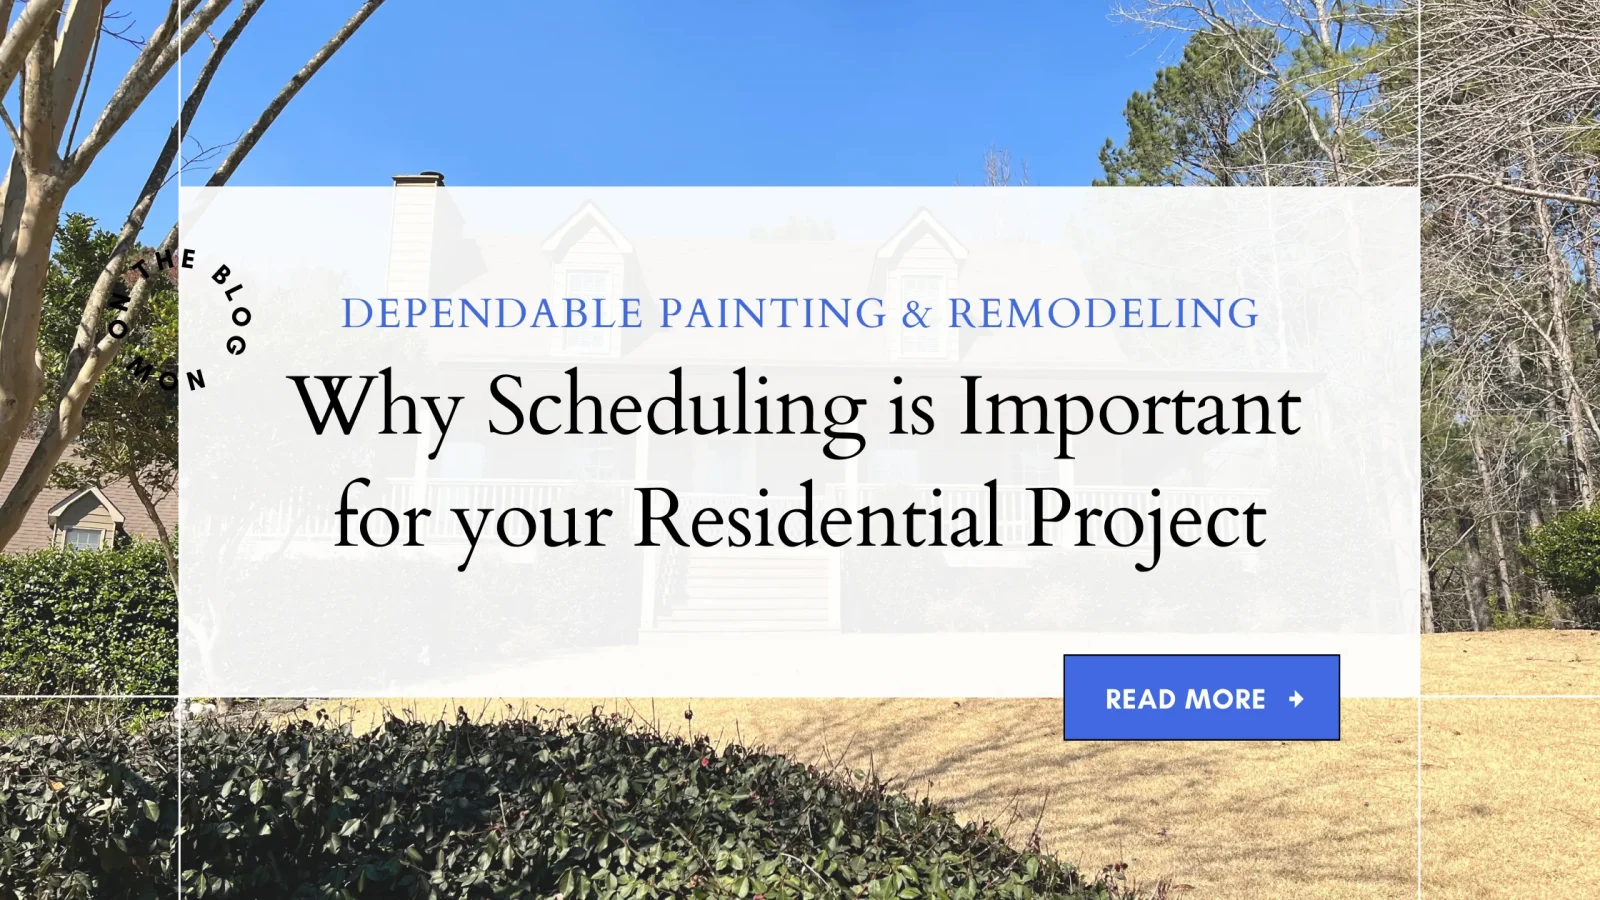 Why Scheduling is Important for your Residential Project